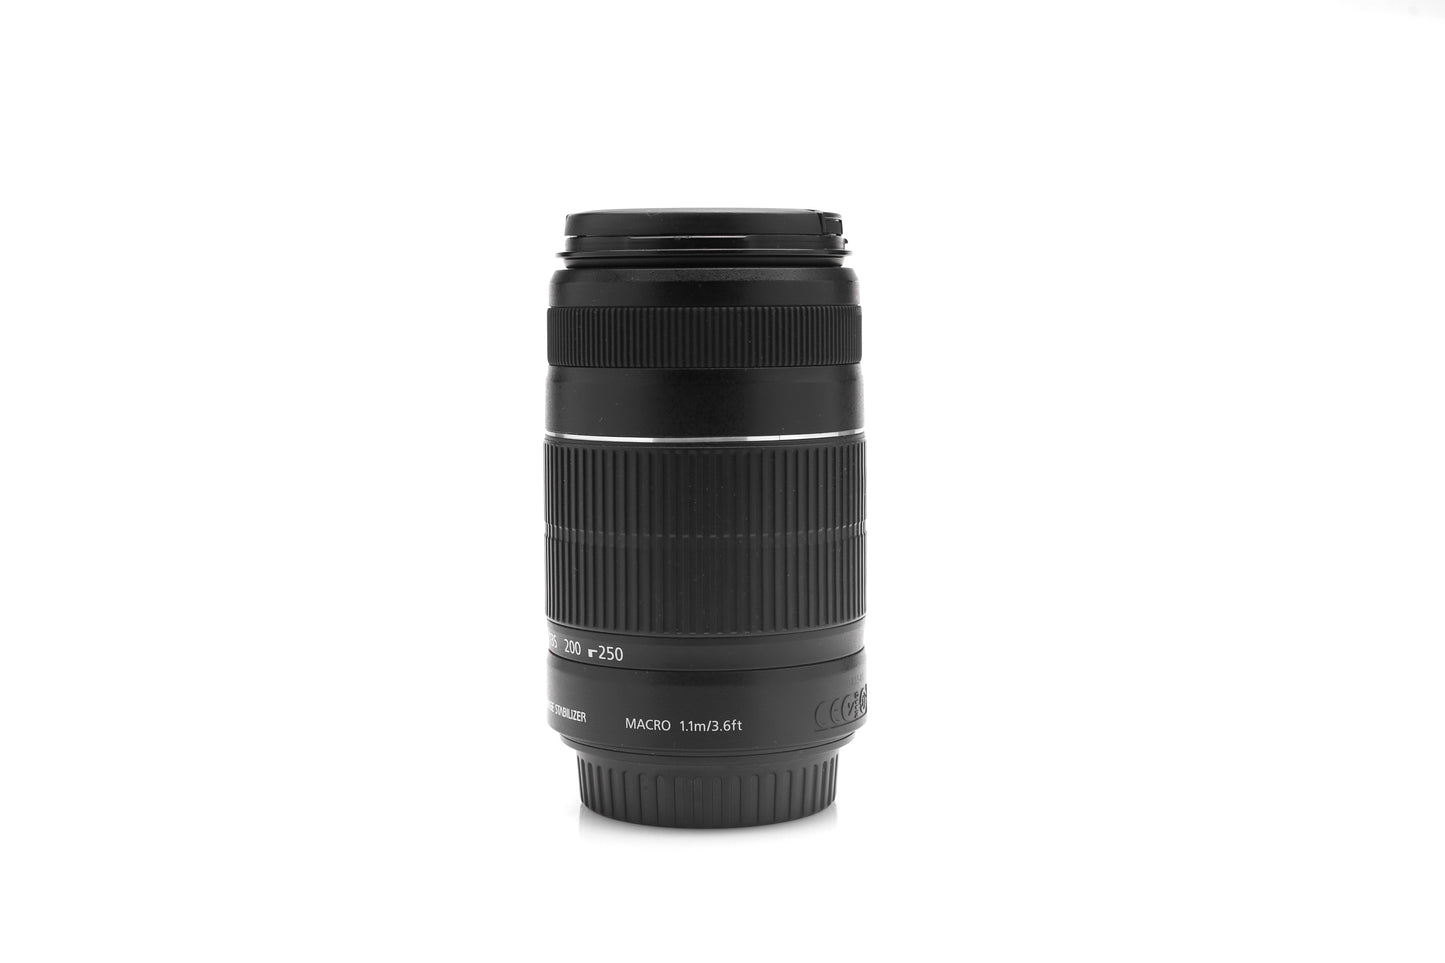 Used Canon EF-S 55-250mm IS ii